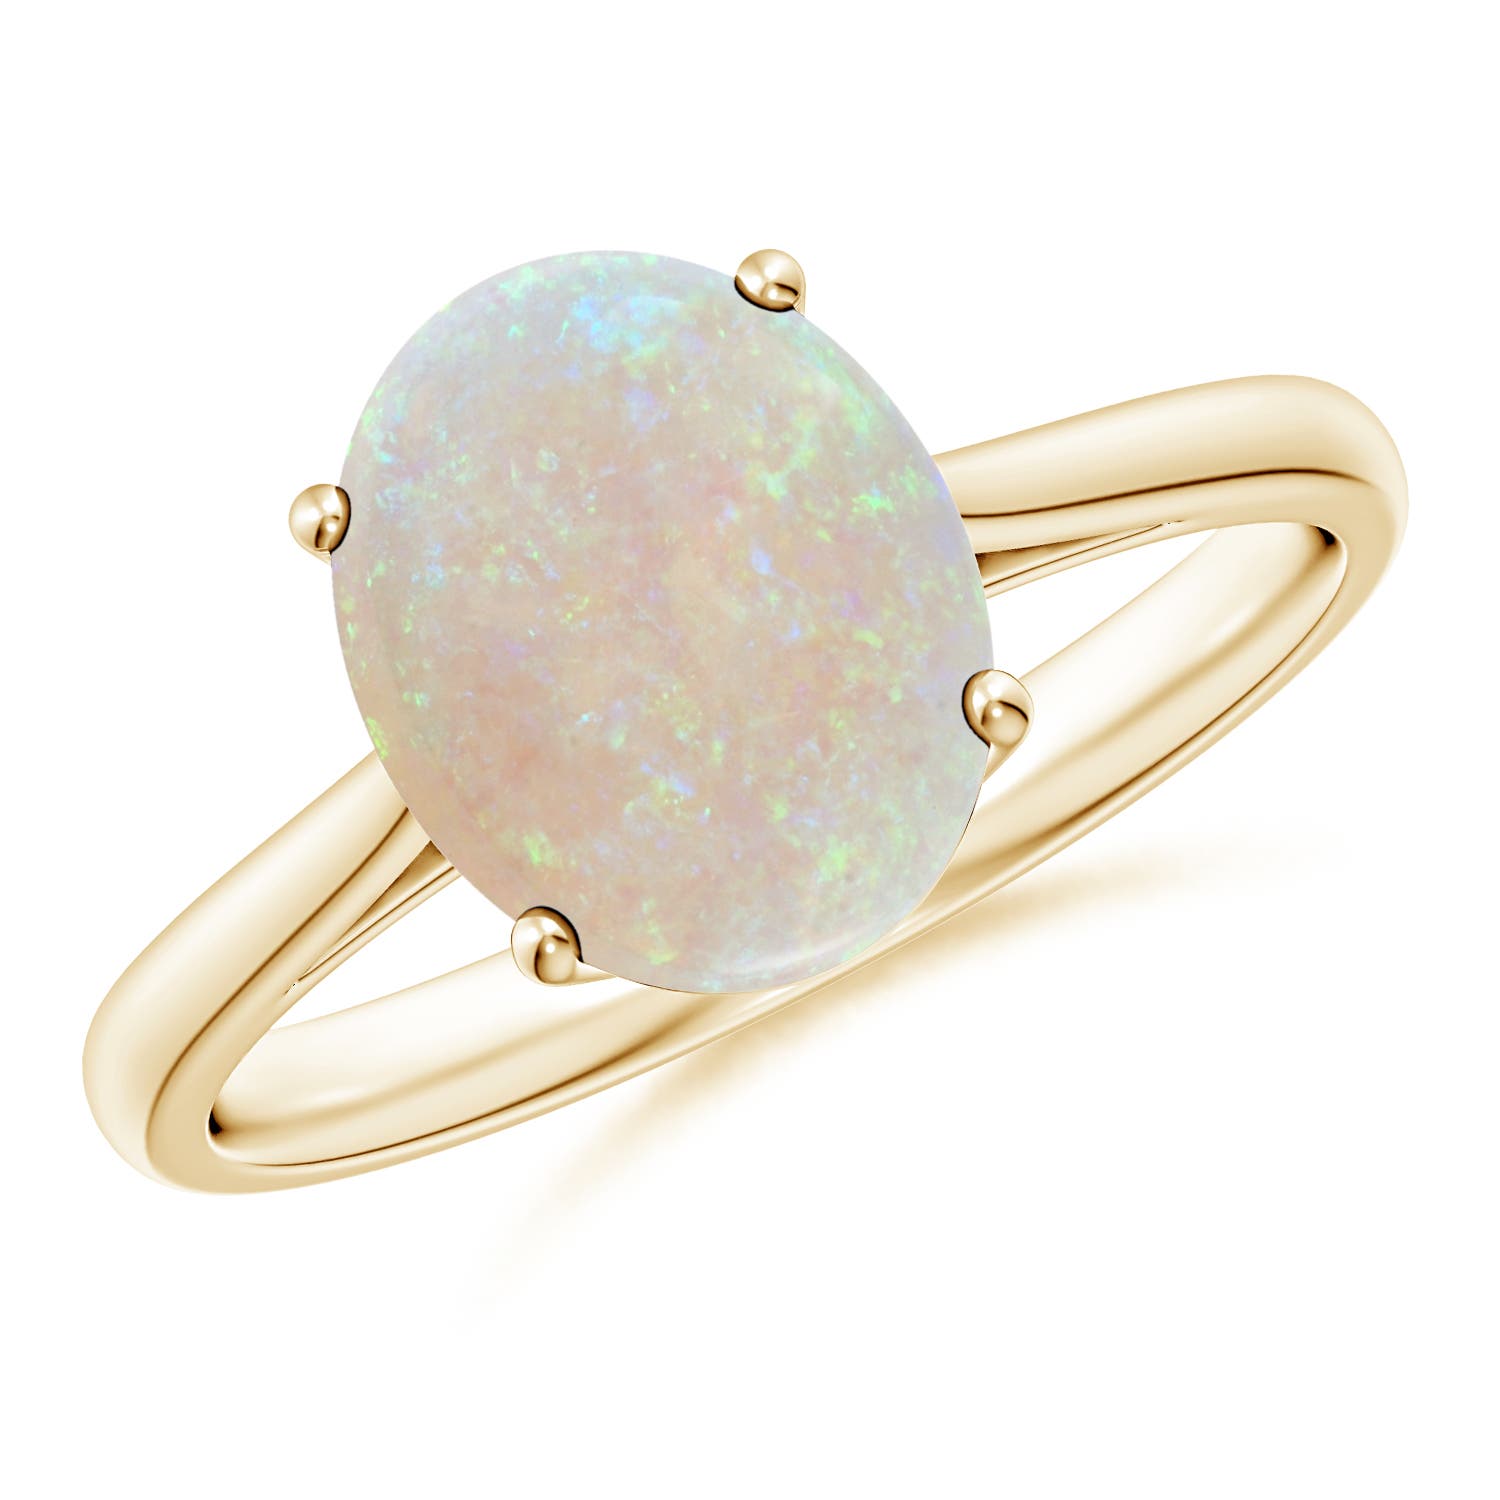 AA - Opal / 1.45 CT / 14 KT Yellow Gold